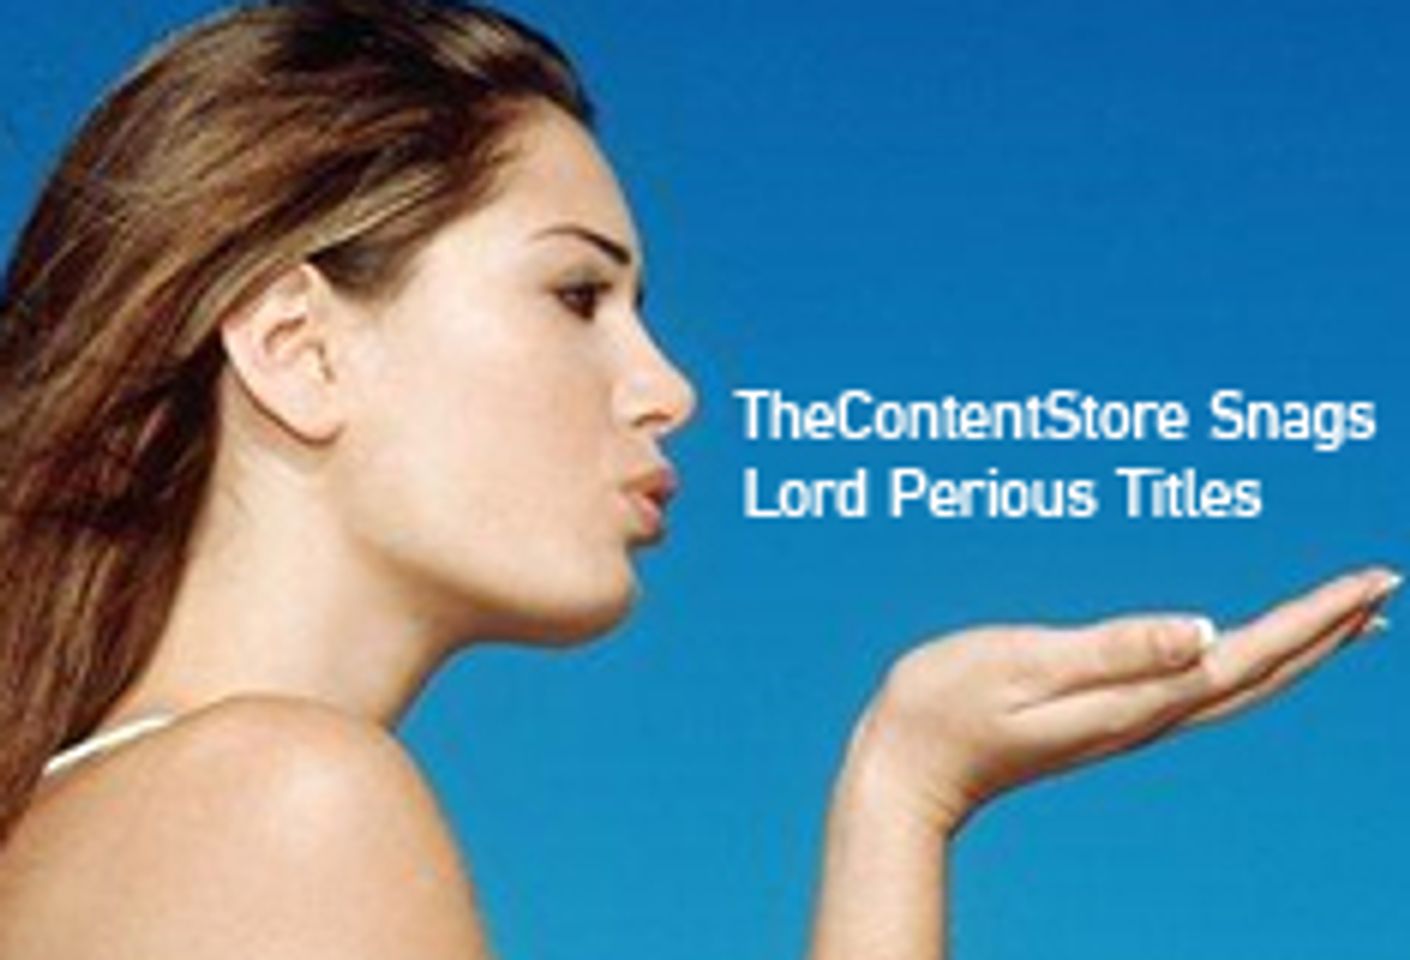 The Content Store Snags Lord Perious Titles